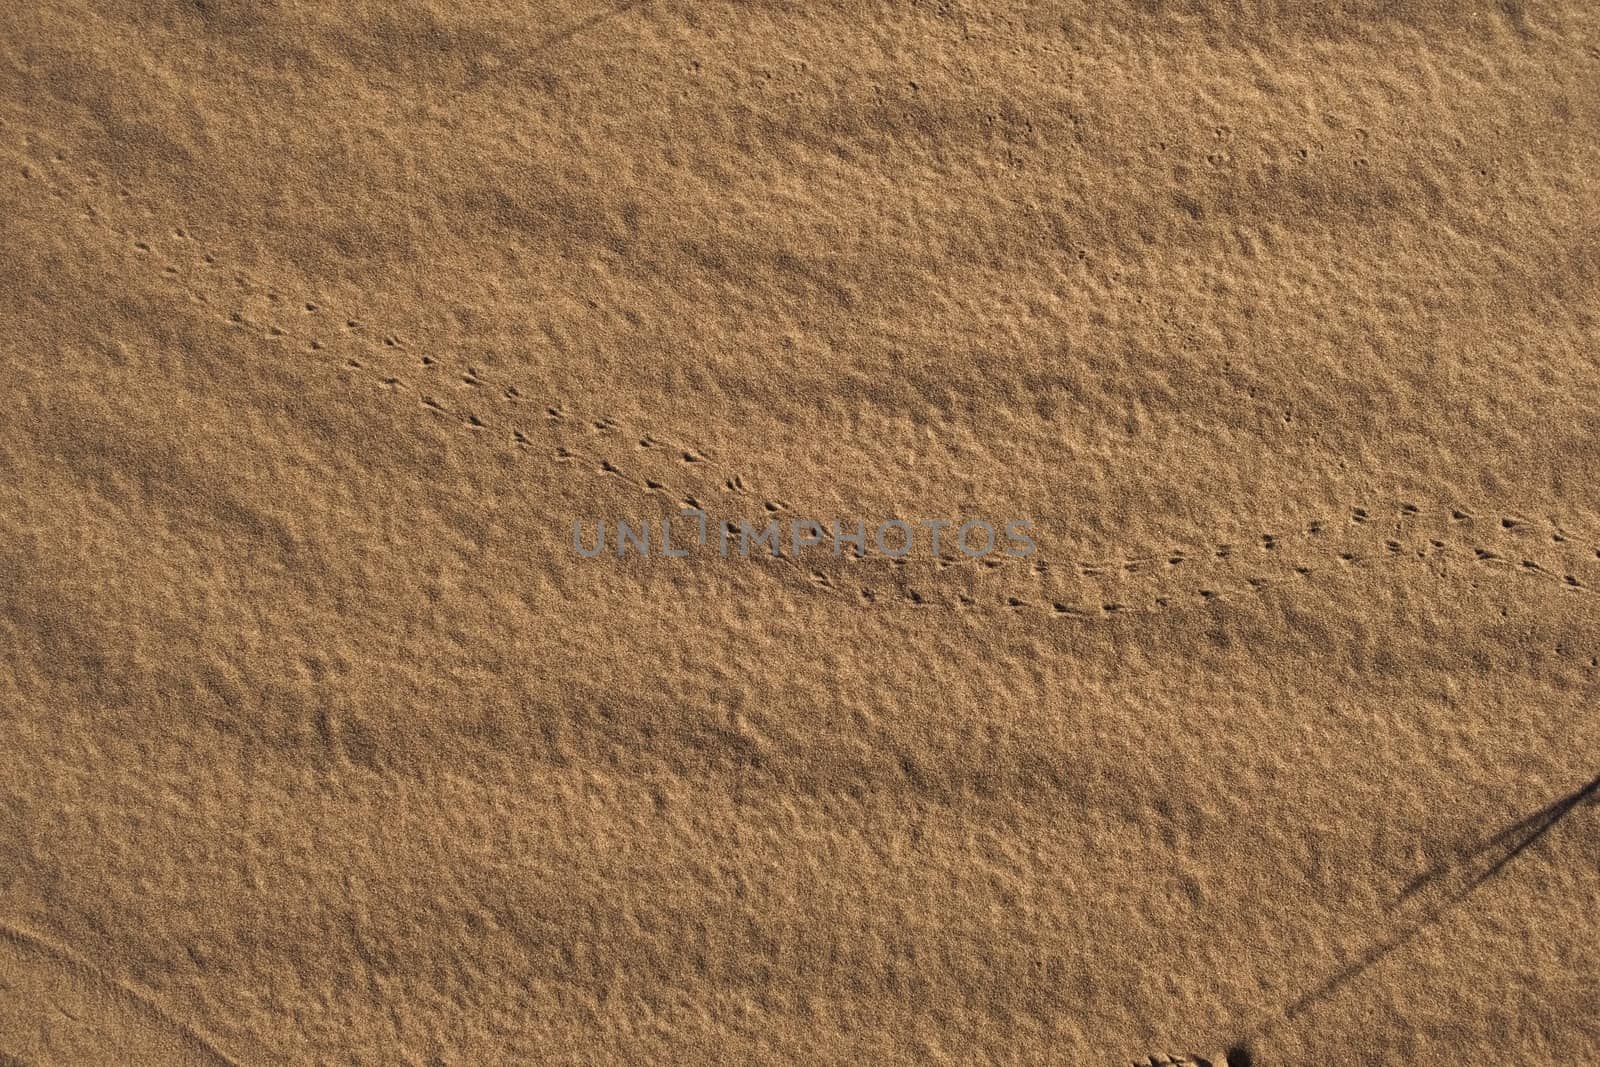 Sands of the desert of Lavalle, province of Mendoza, Argentina. An insect trail can be seen.